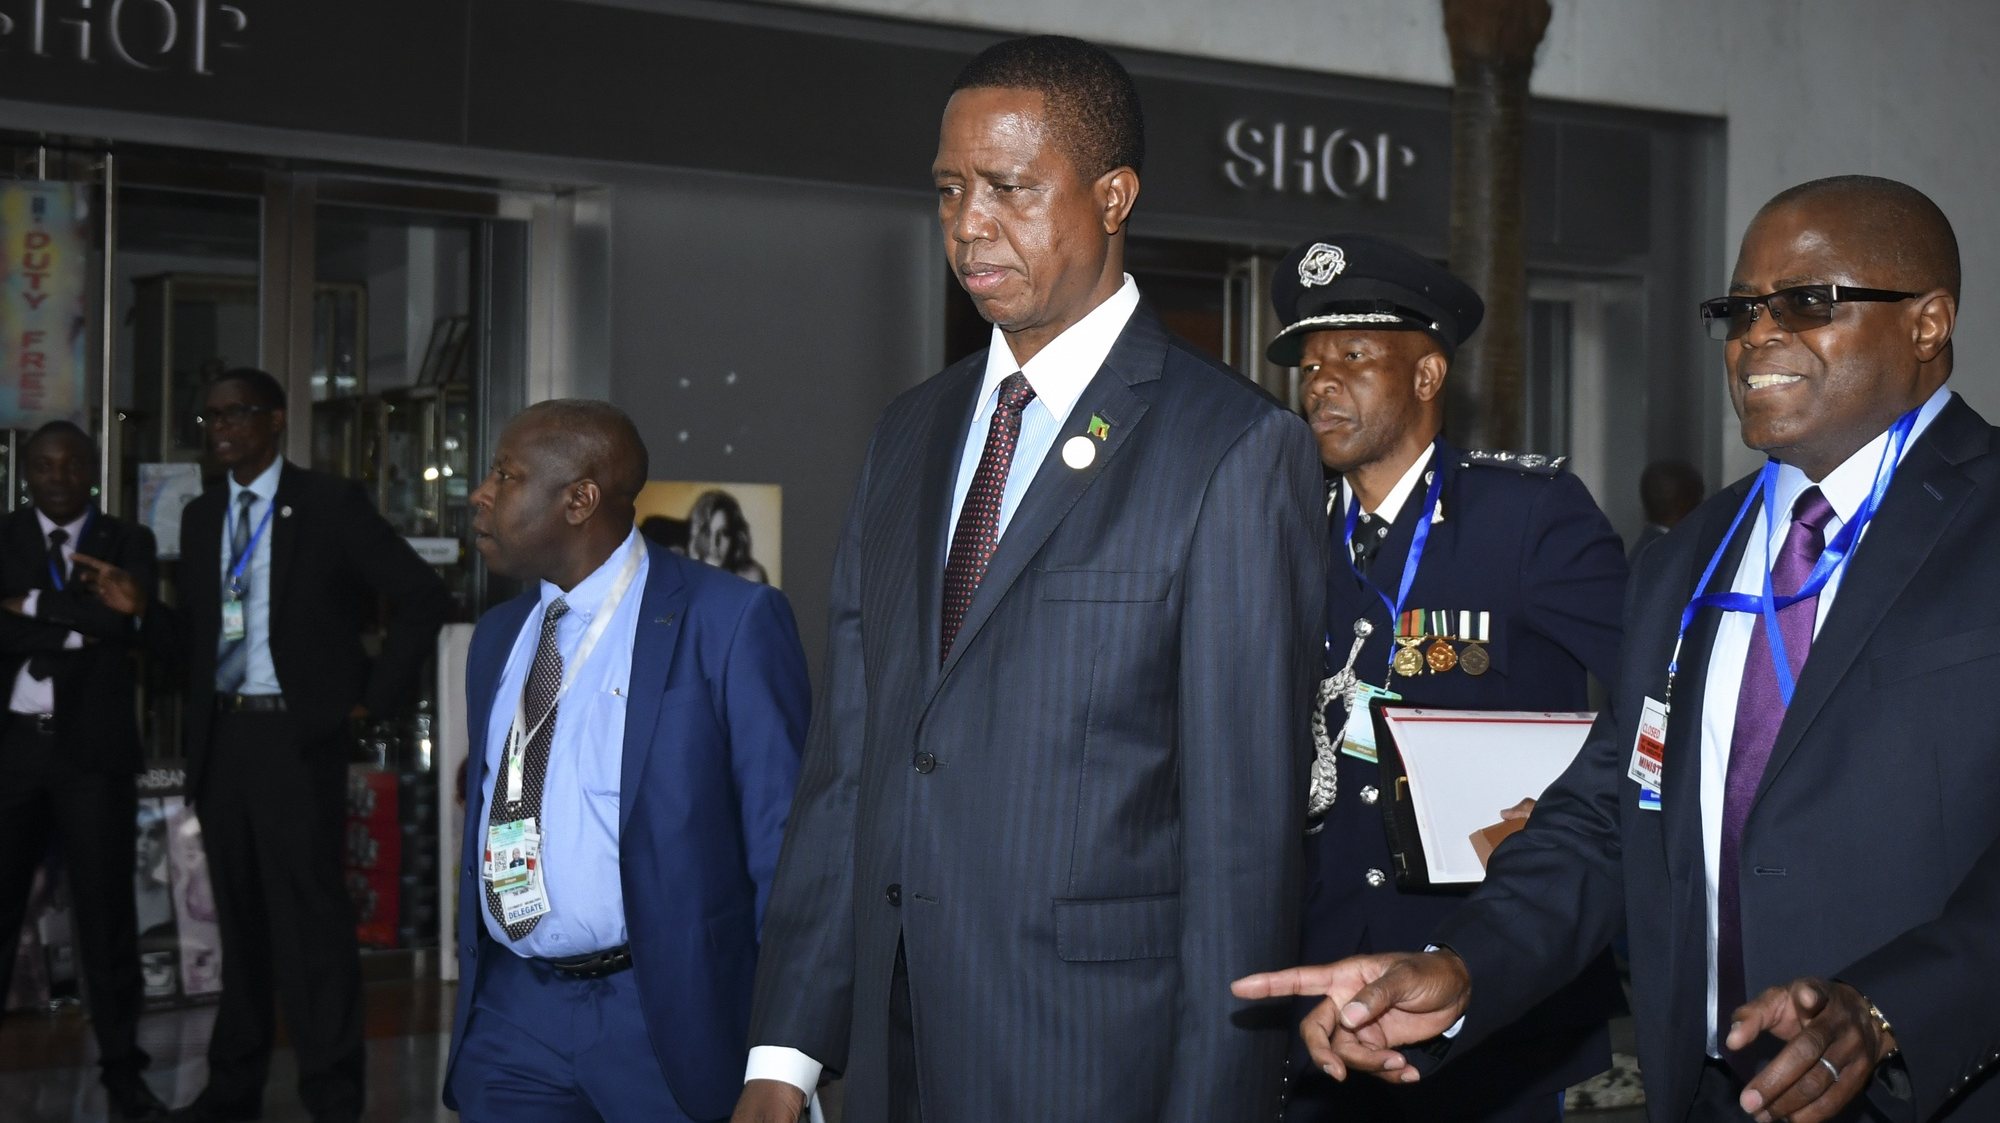 epa07358386 President of Zambia Edgar Lungu (C) arrives to attend the 32nd African Union Summit in Addis Ababa, Ethiopia, 10 February 2019. African heads of state and business leaders are gathering in Ethiopian capital for a two-day summit under the theme &#039;Refugees, Returnees and Internally Displaced Persons: Towards Durable Solutions to Forced Displacement in Africa&#039;.  EPA/STRINGER